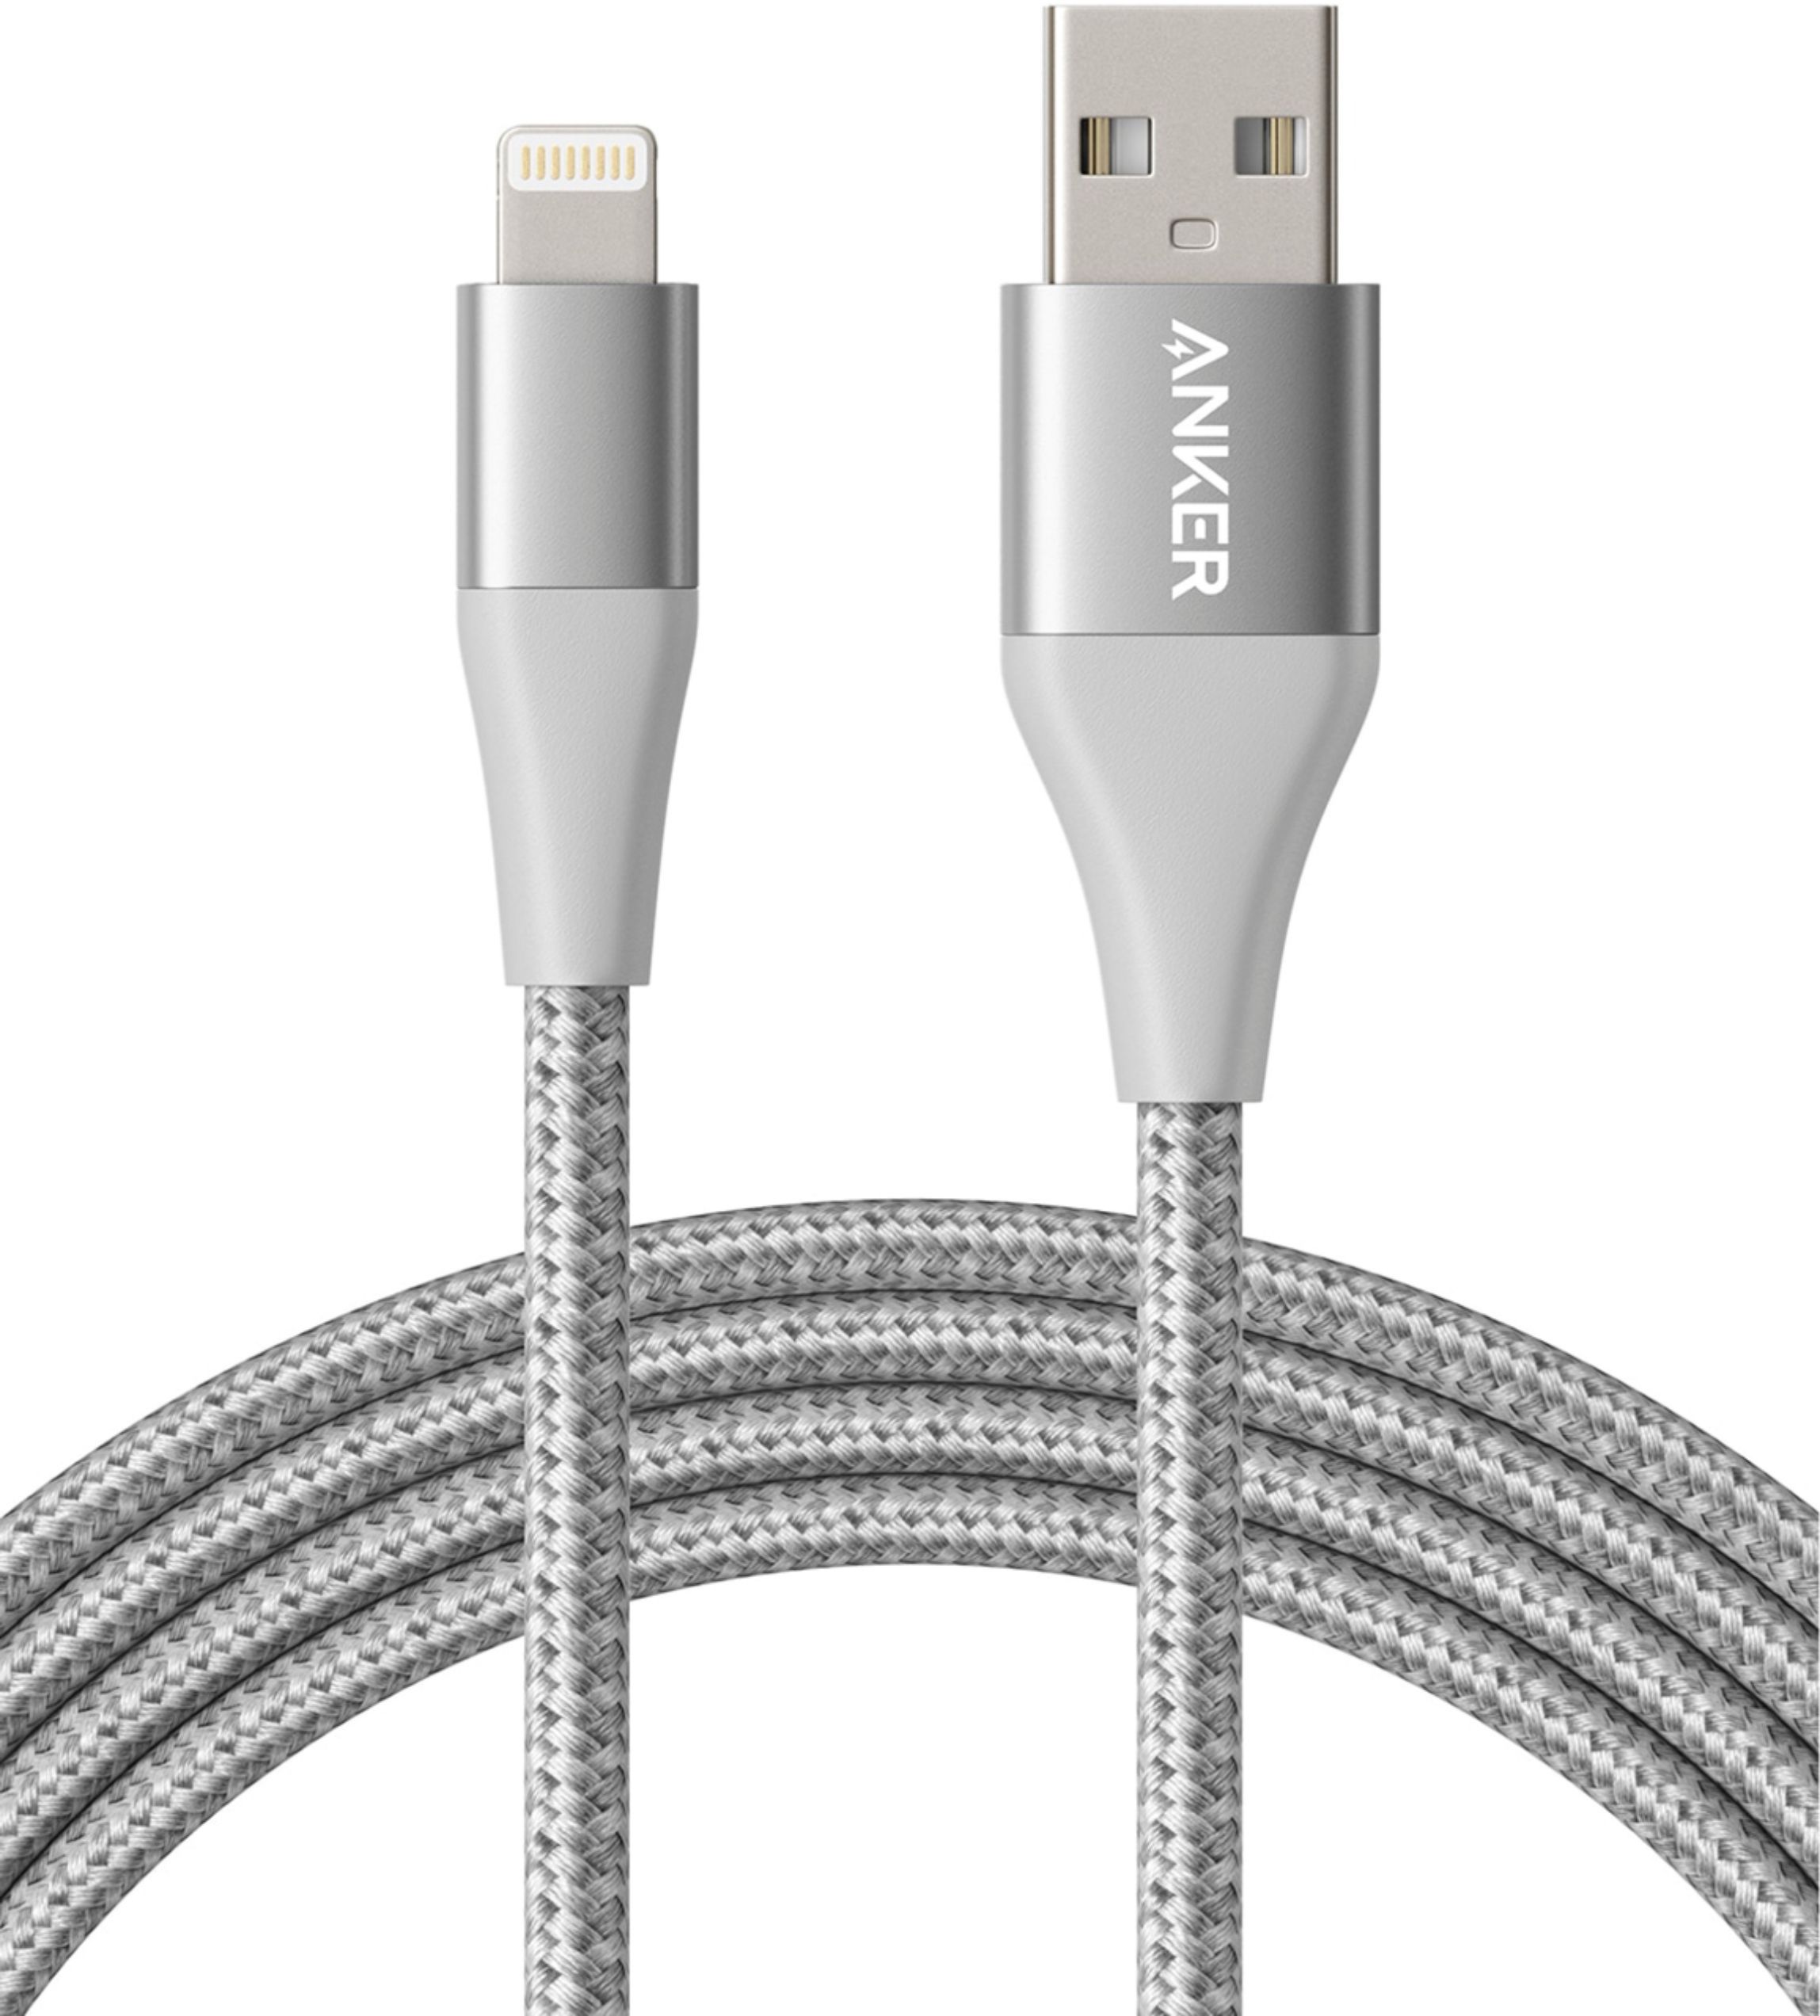 Review: Anker Powerline II USB-C Lightning cable is cheaper and more  durable than Apple's